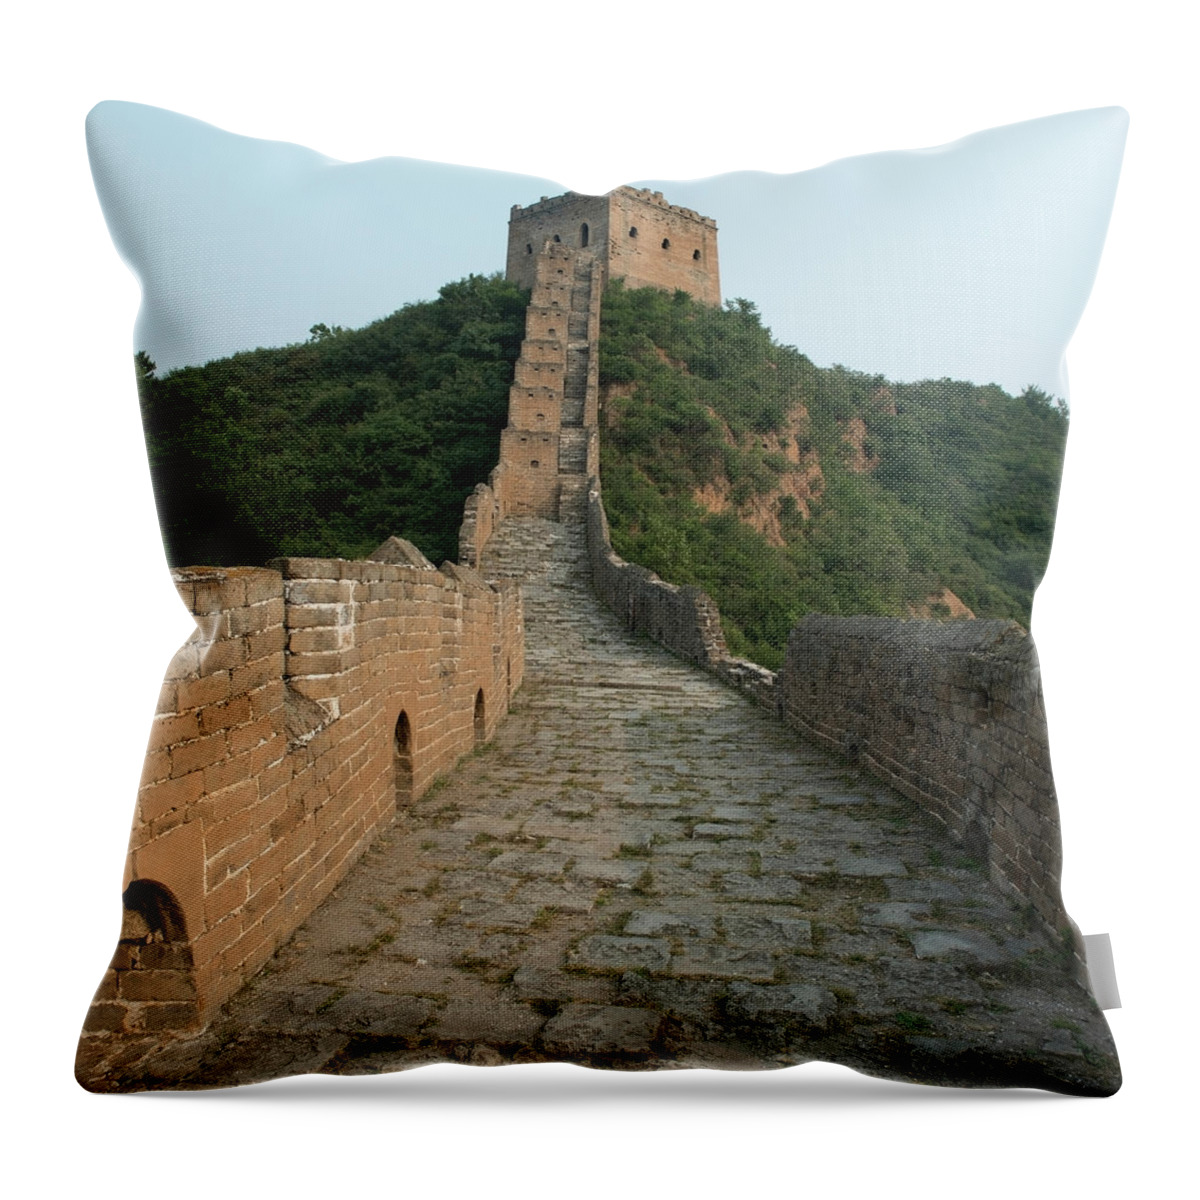 Chinese Culture Throw Pillow featuring the photograph The Great Wall Of China by Keith Levit / Design Pics